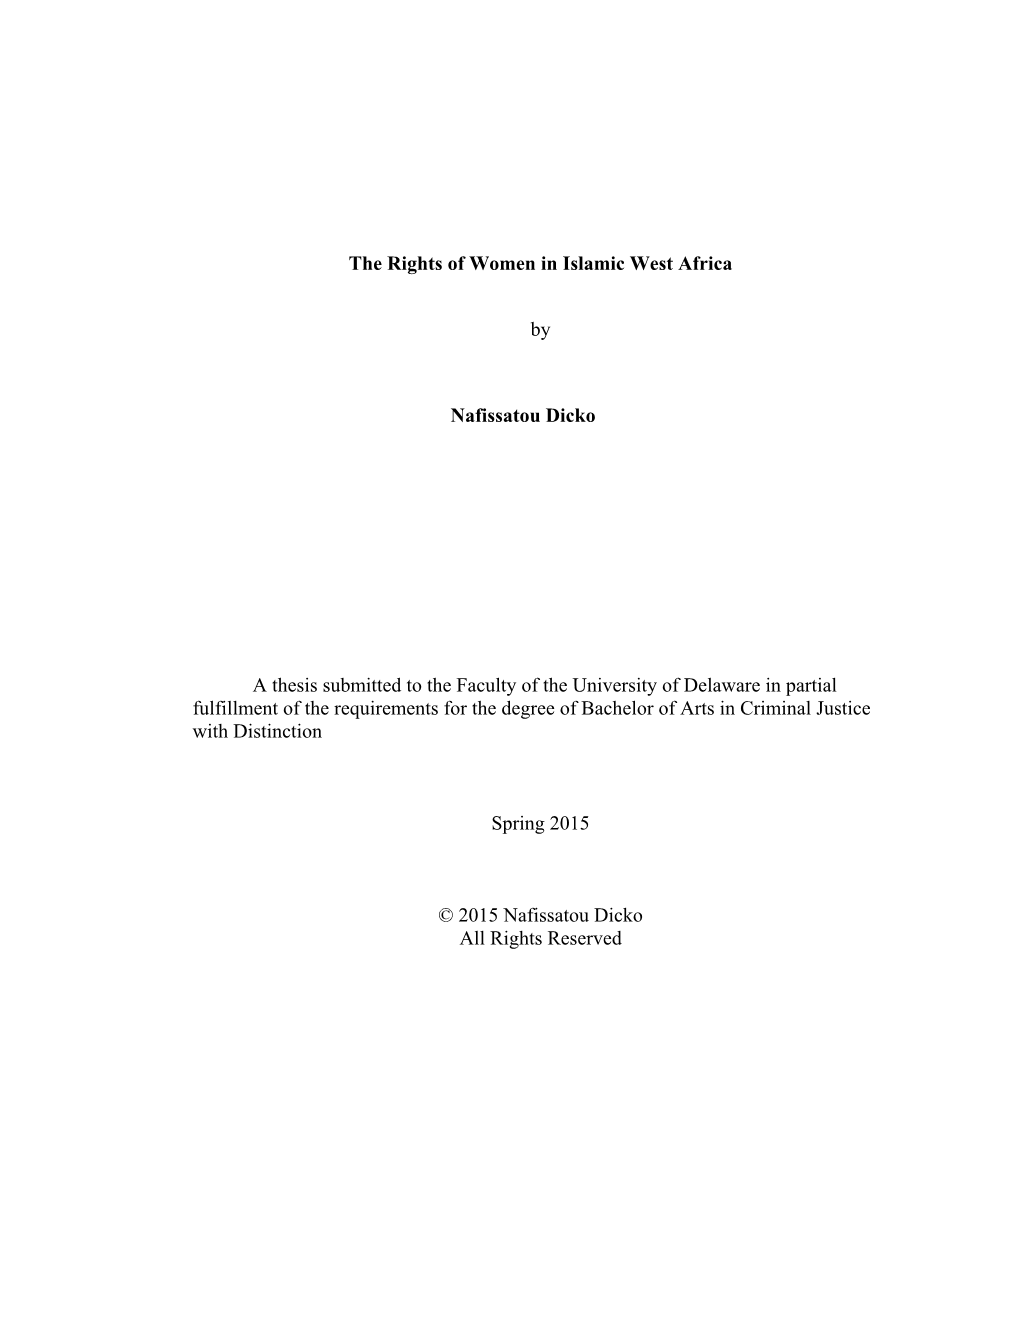 The Rights of Women in Islamic West Africa by Nafissatou Dicko a Thesis